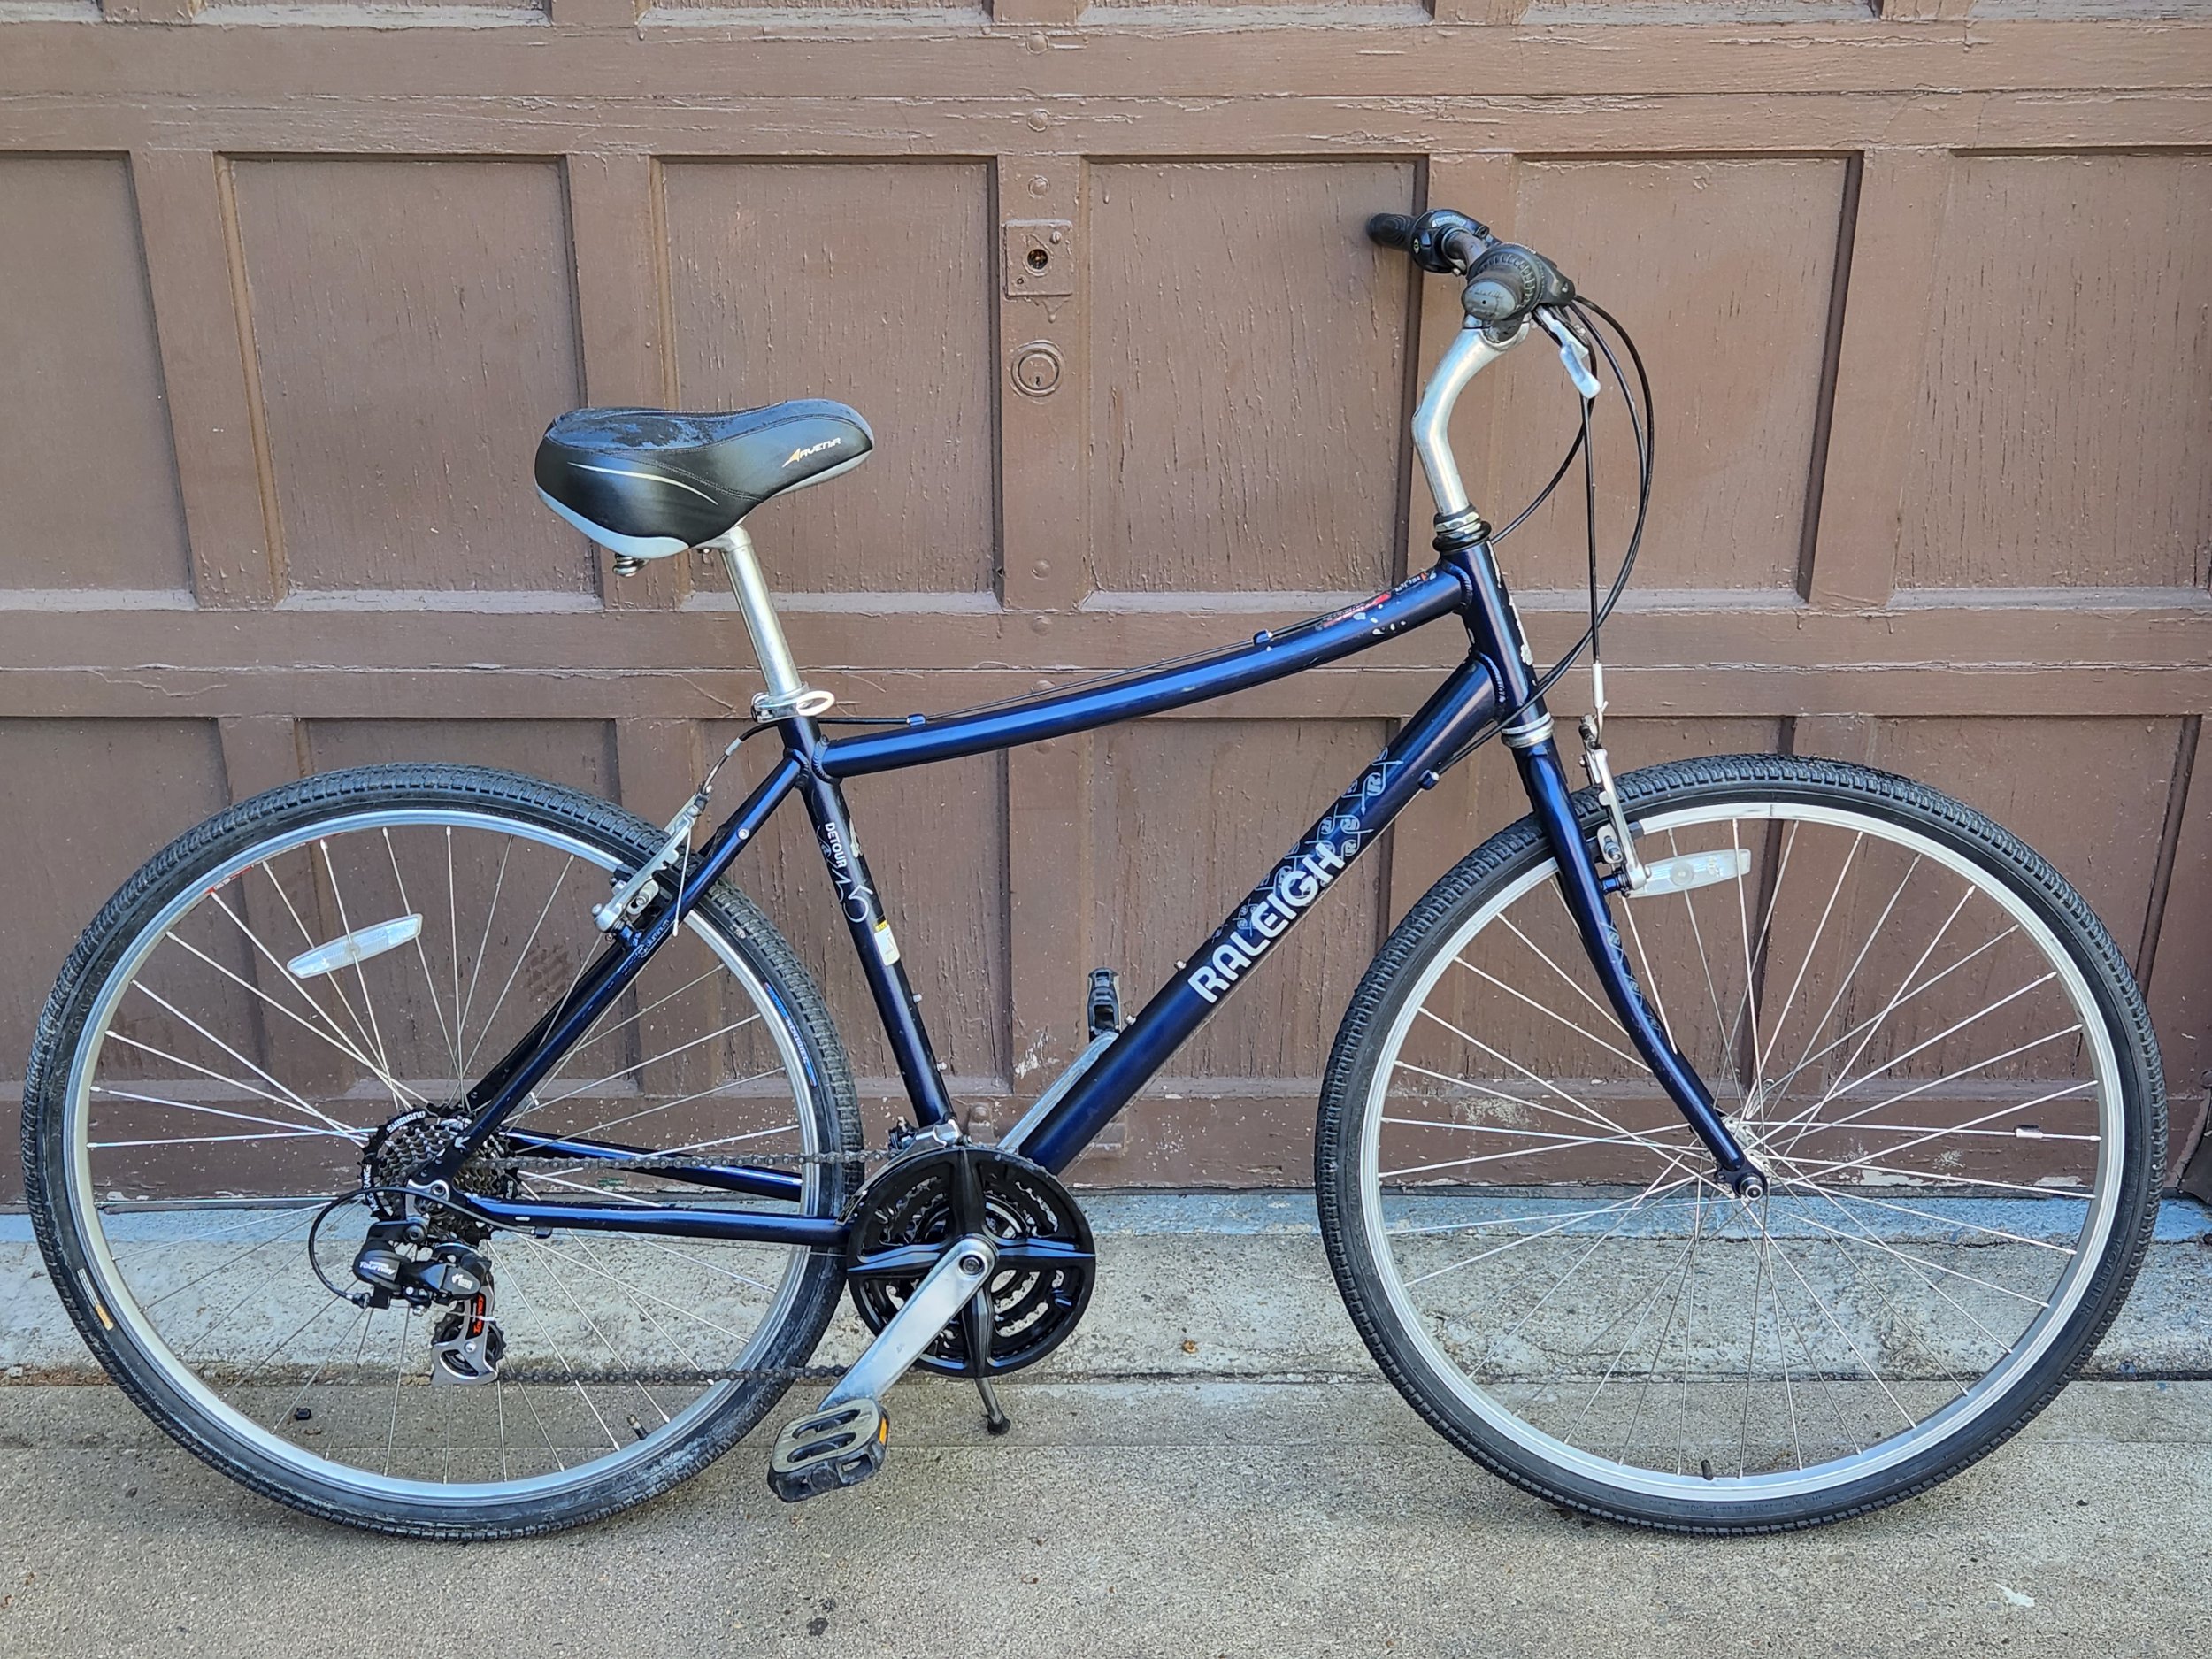 Used, restored and overhauled bikes and parts in Pittsburgh PA